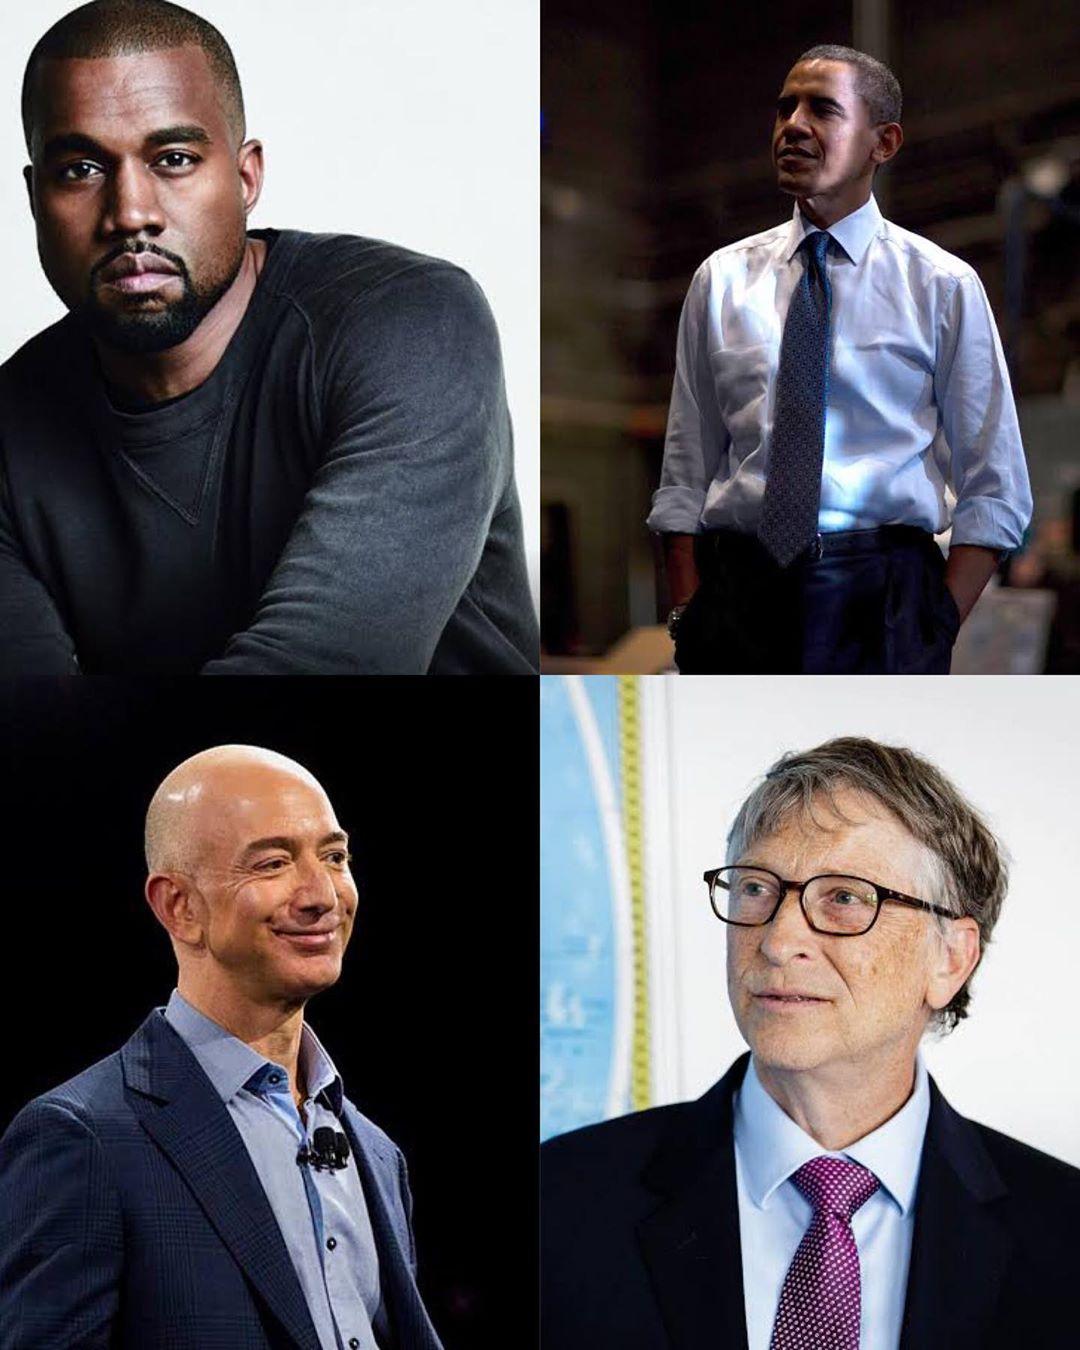 Hackers make millions of naira after hacking twitter accounts of Bill Gates, Barrack Obama, Jeff Bezoz, Kanye West, others